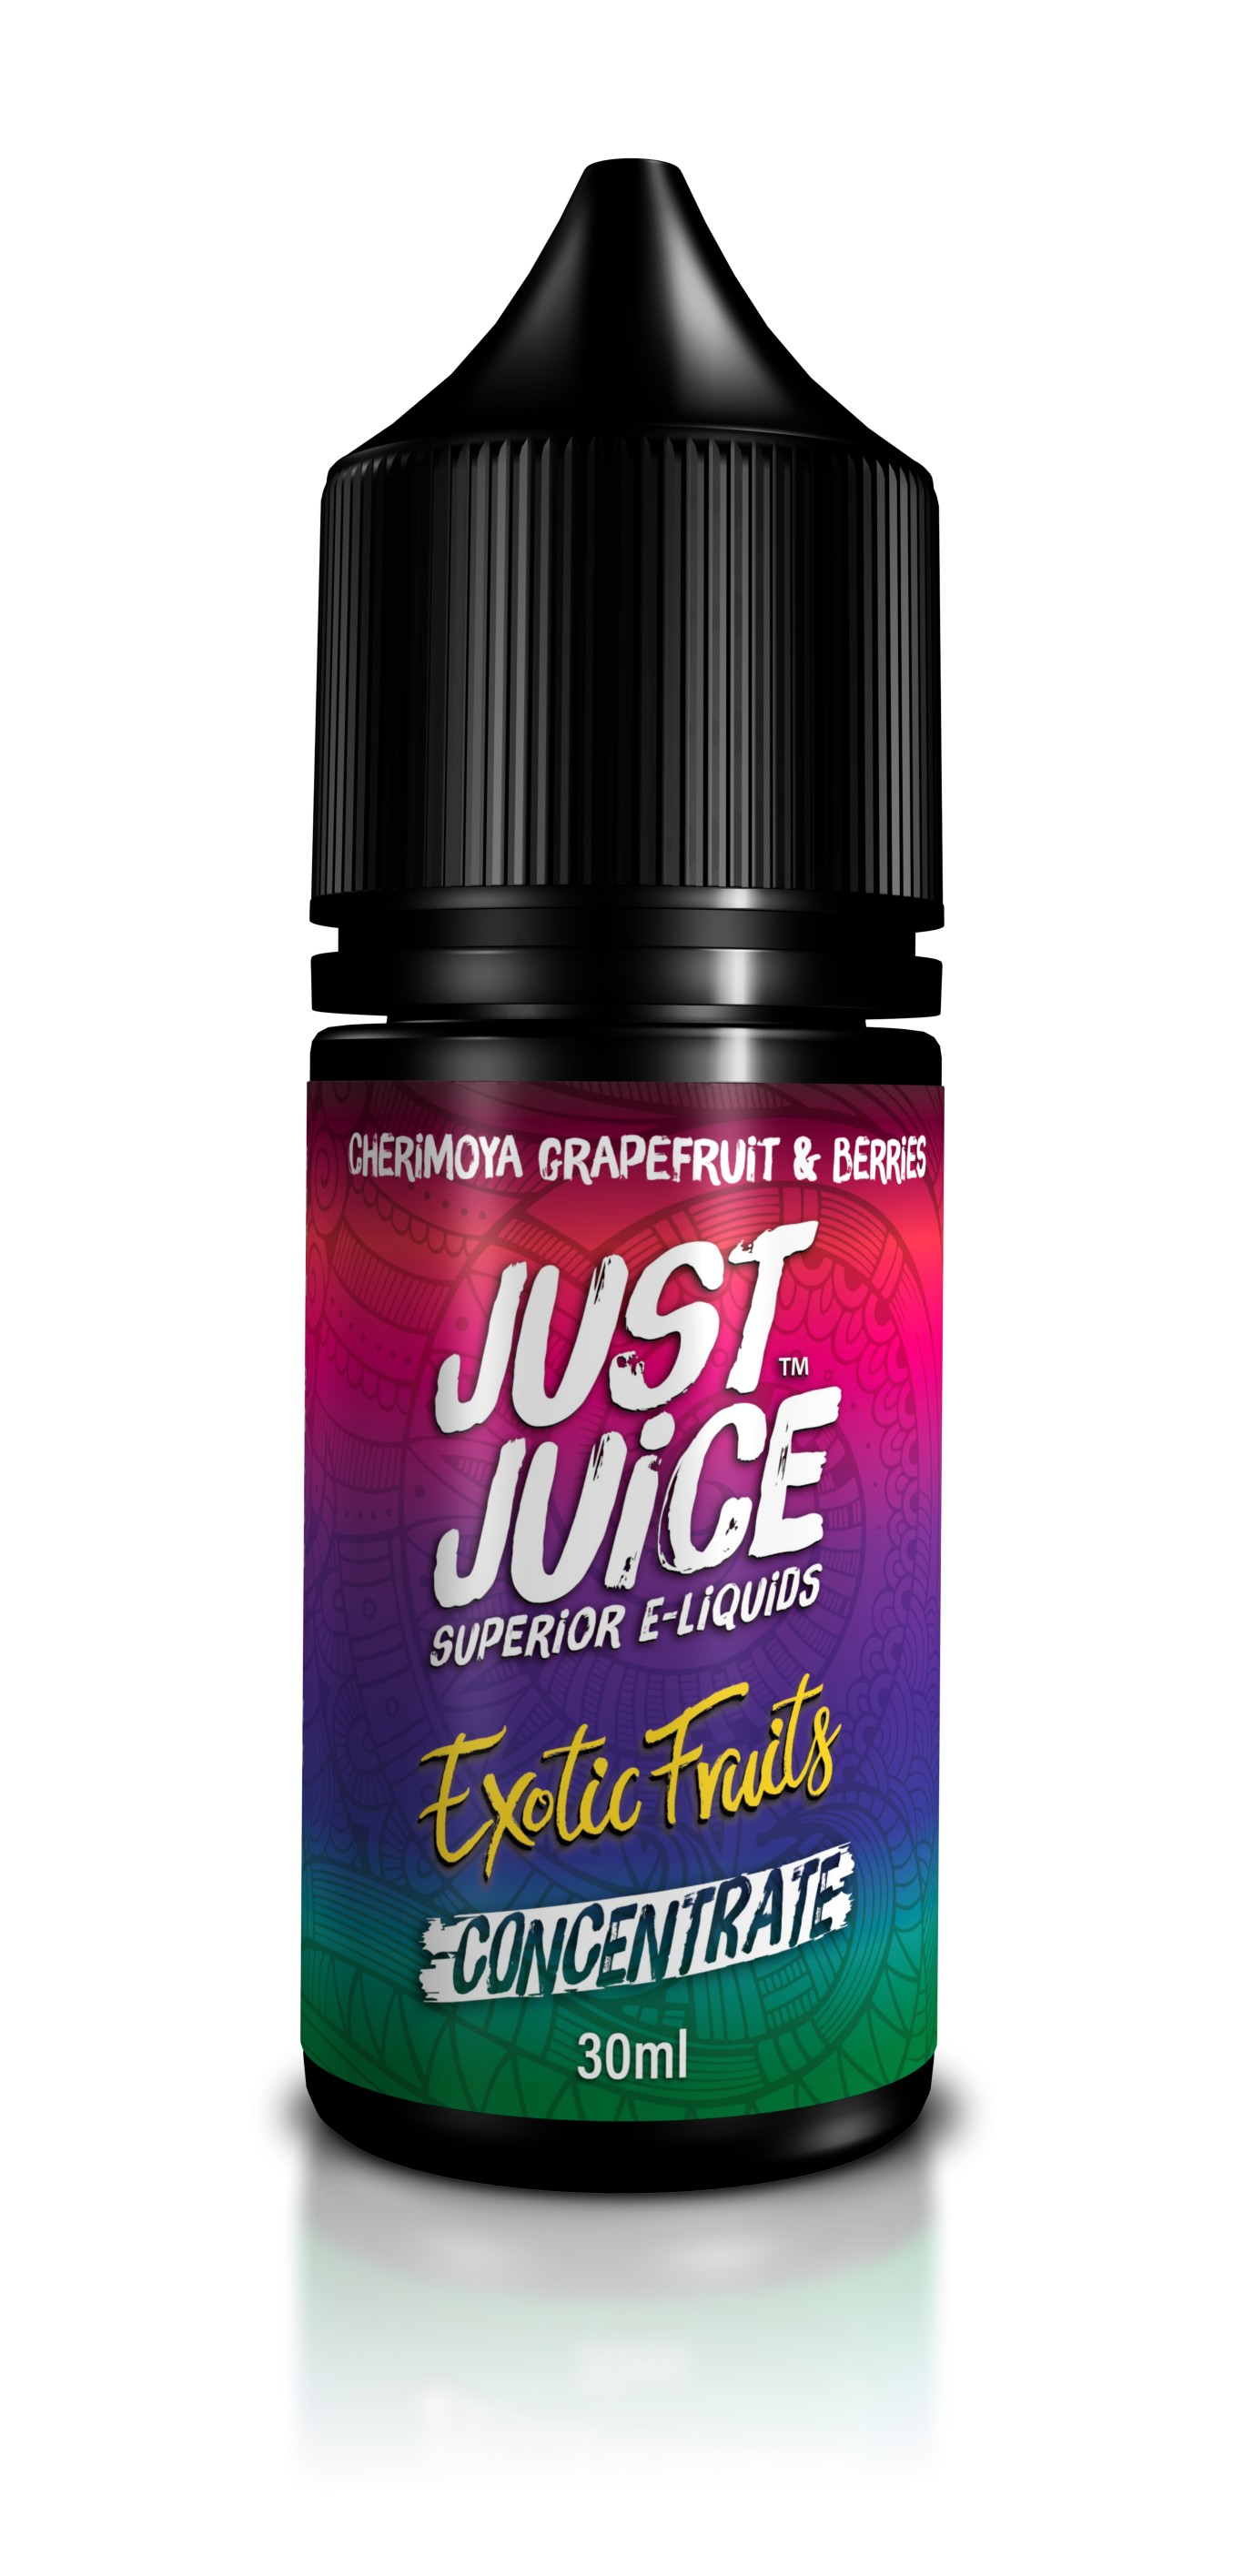 Cherimoya Grapefruit & Berries Flavour Concentrate by Just Juice